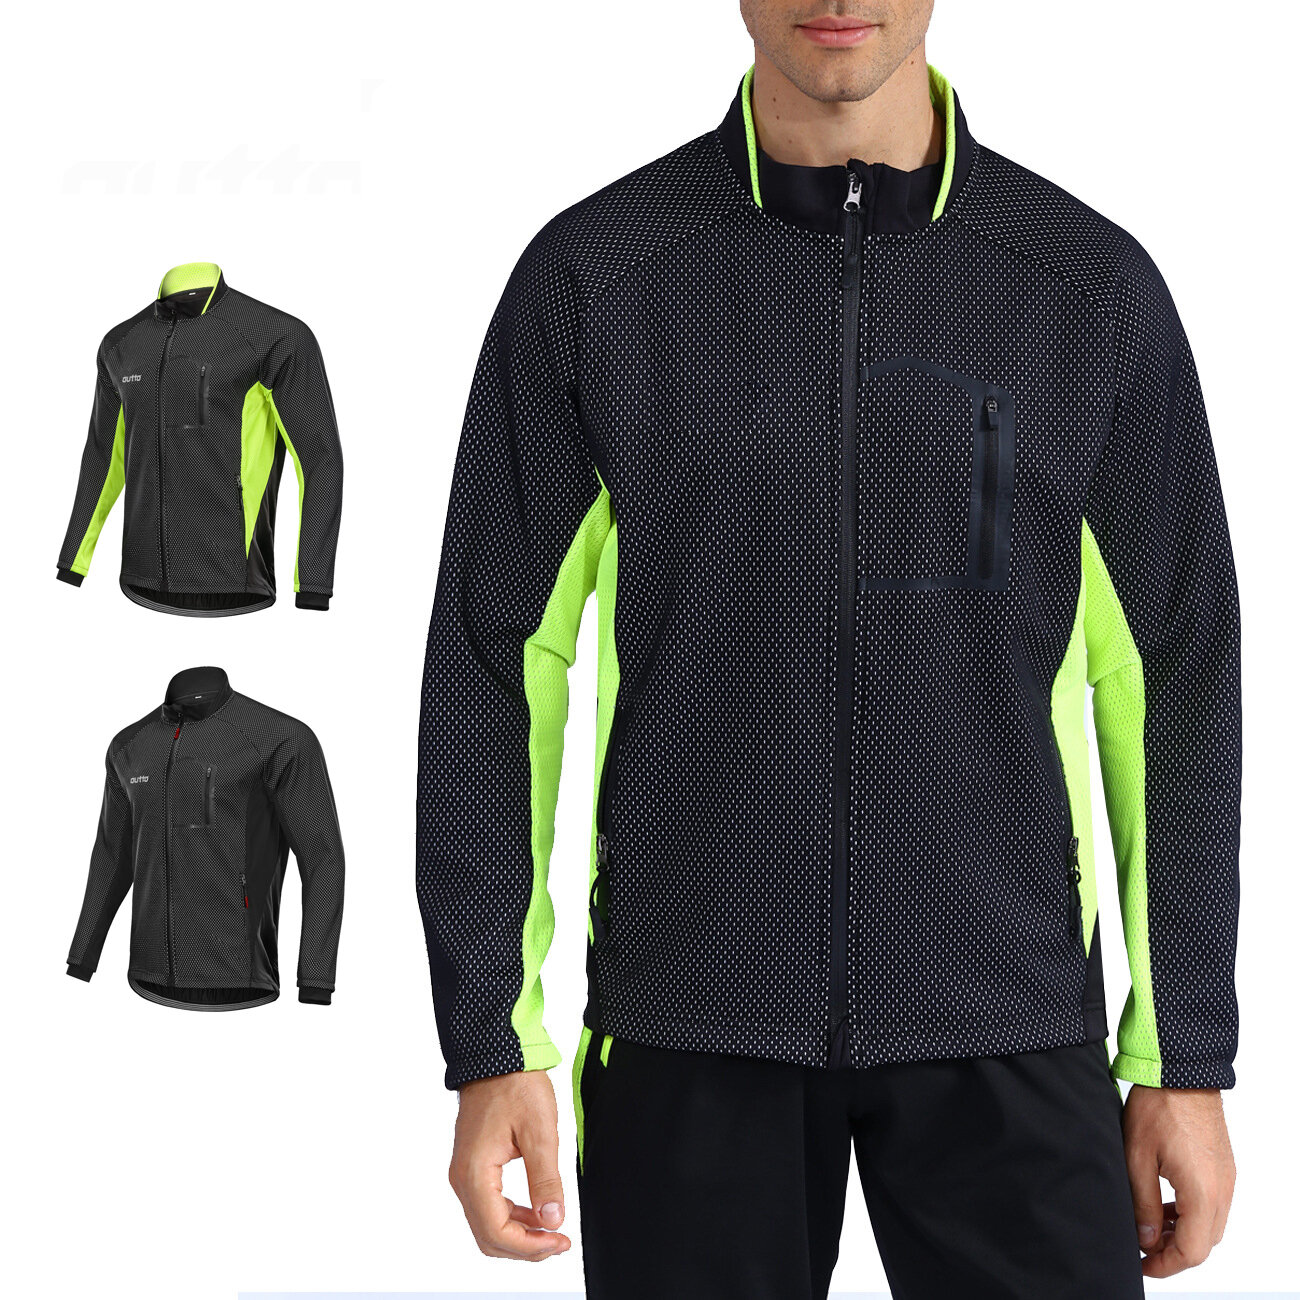 OUTTO Winter Cycling Jackets Warm MTB Jersey Bike Thermal Fleece Coats Windbreaker Windproof Bicycle Clothes Outdoor Sports Clothing